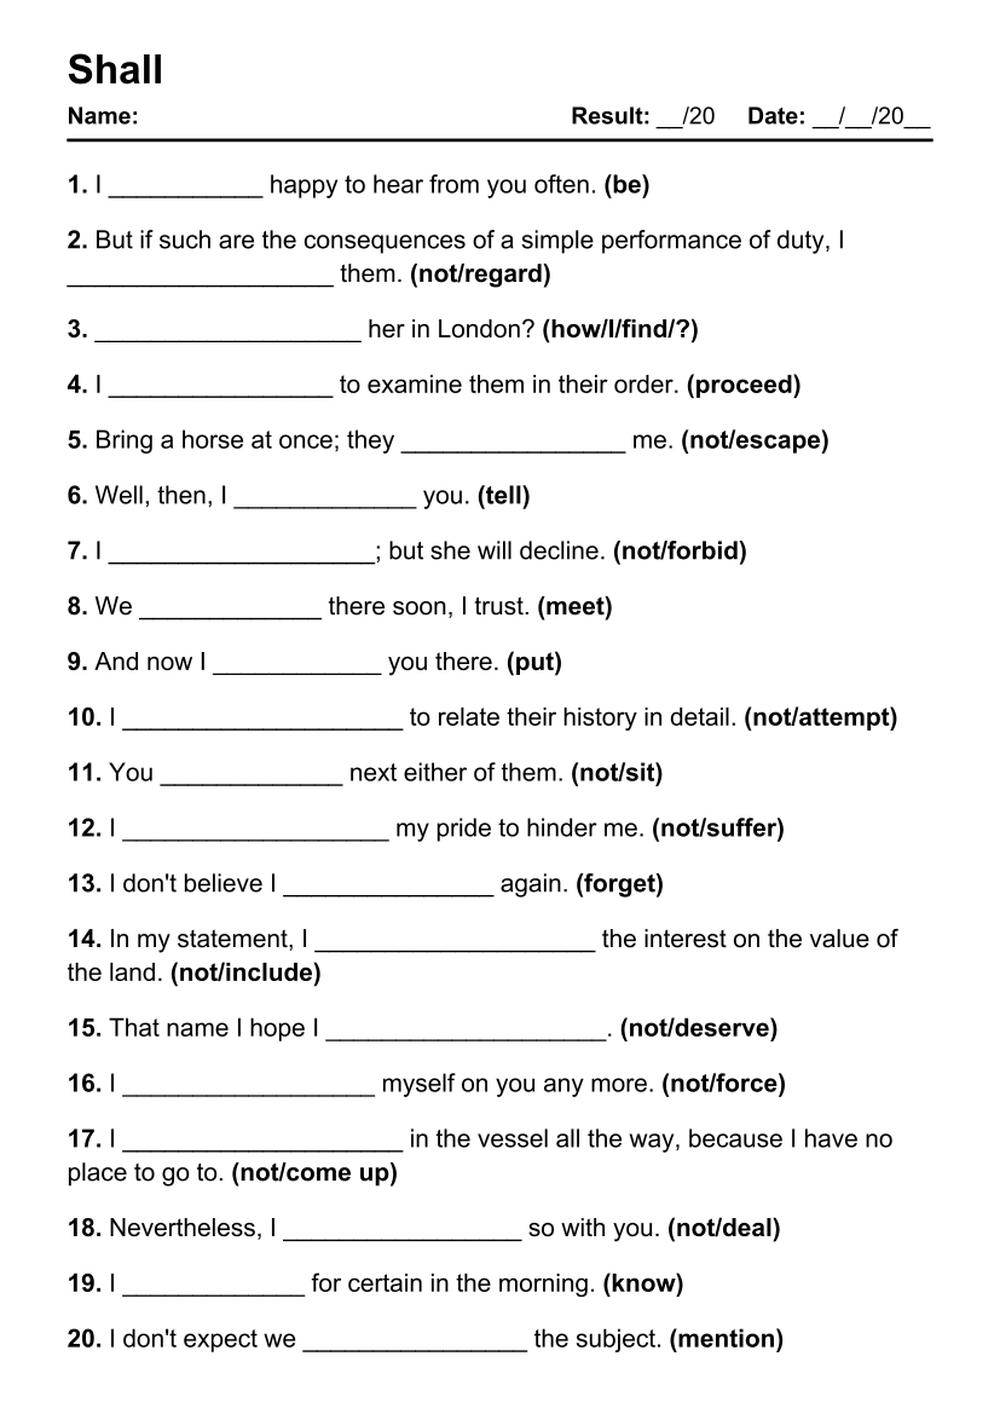 Printable Shall Exercises - PDF Worksheet with Answers - Test 30